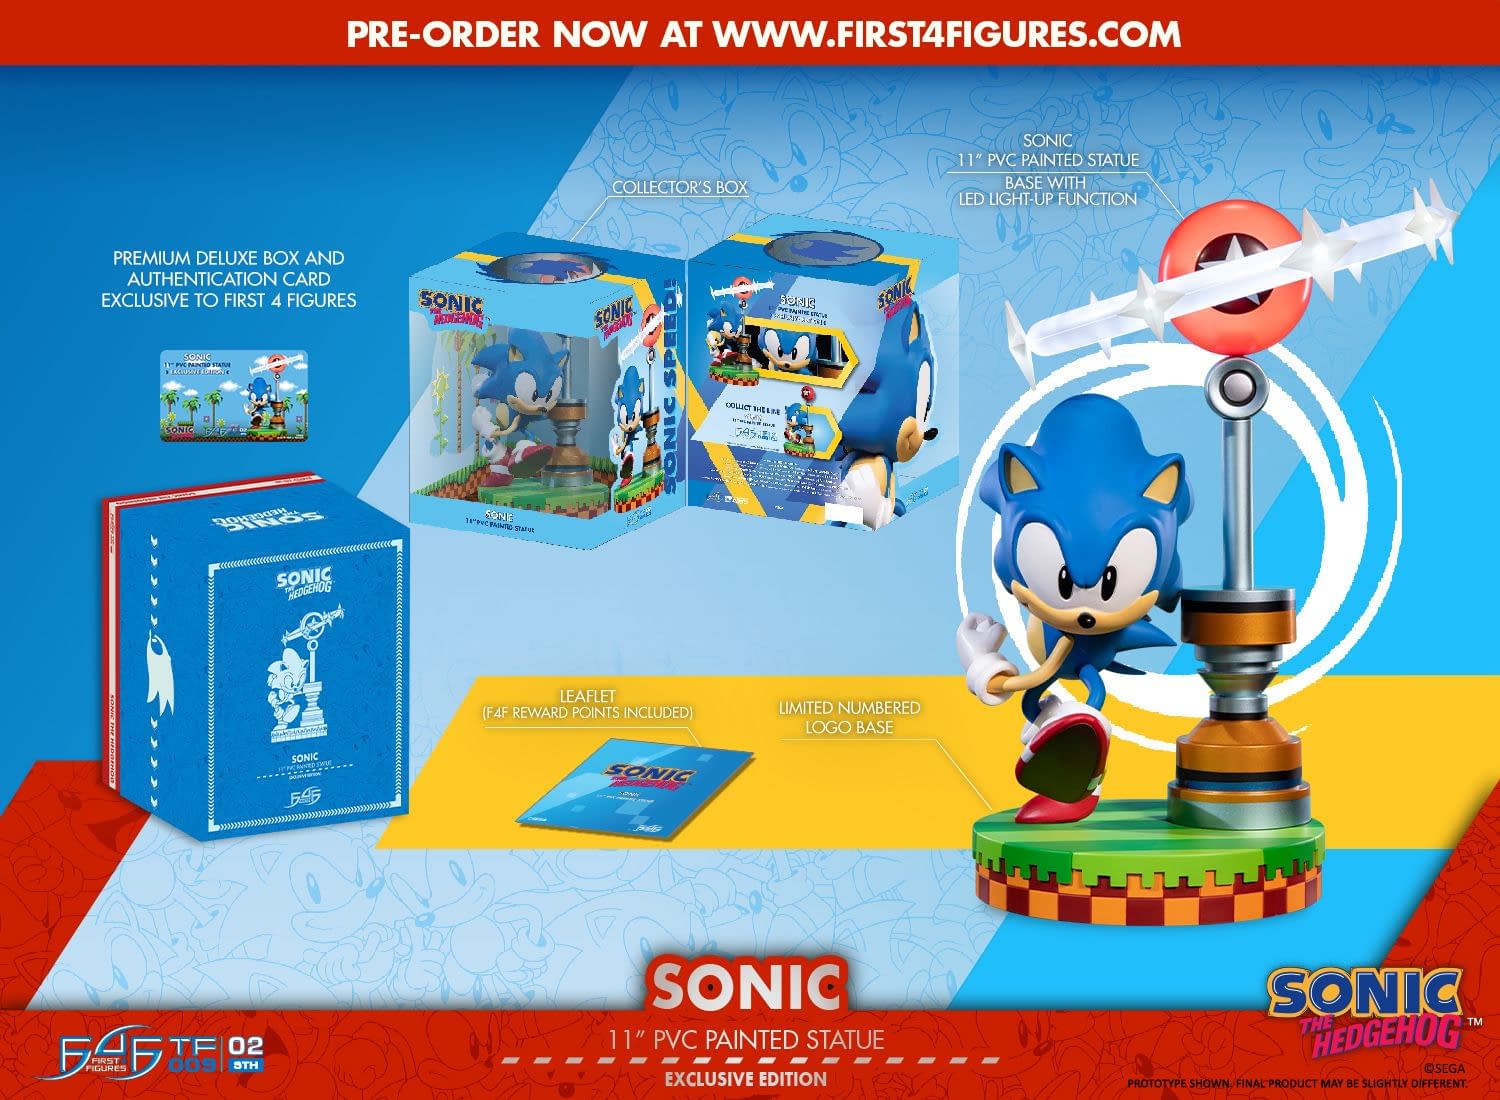 Sonic Goes for the Goal with New Exclusive First 4 Figures Statue